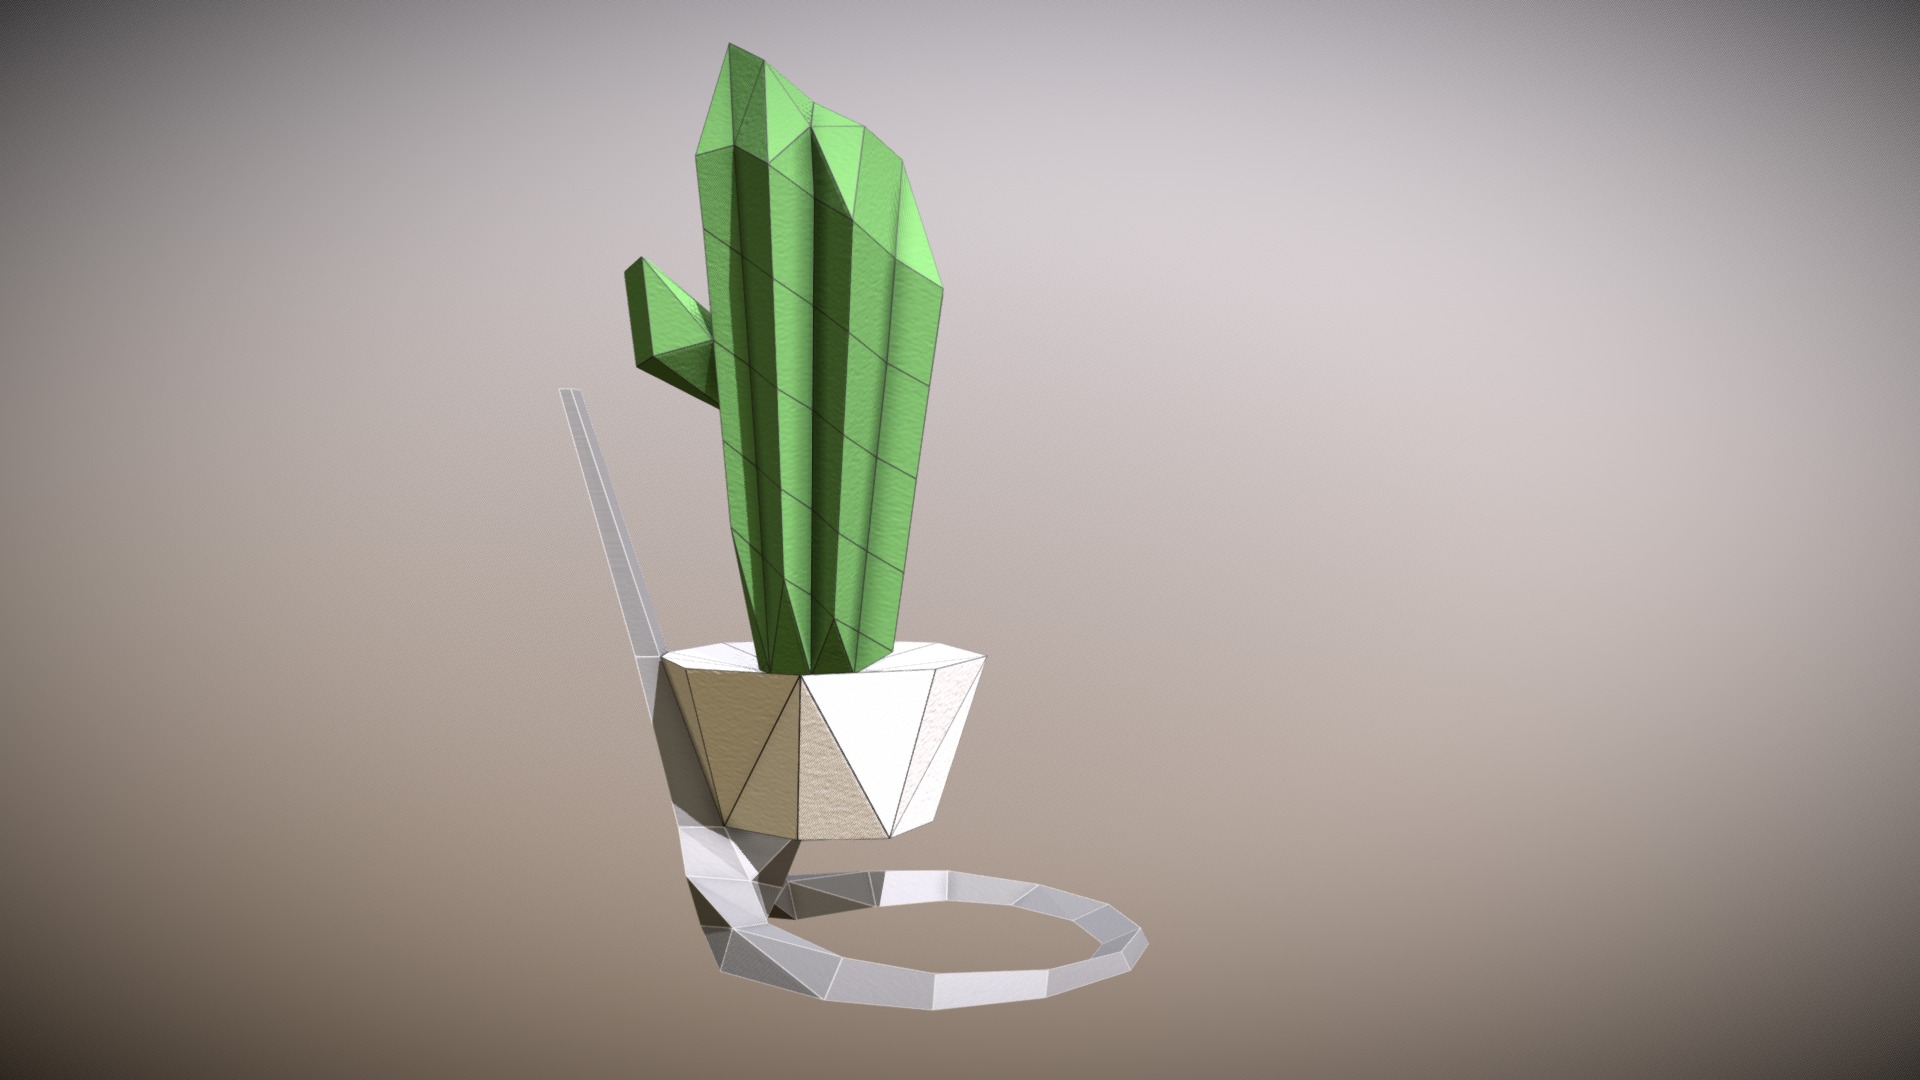 3D model Lowpoly Cactus - This is a 3D model of the Lowpoly Cactus. The 3D model is about a paper cutout of a green leaf on a white surface.